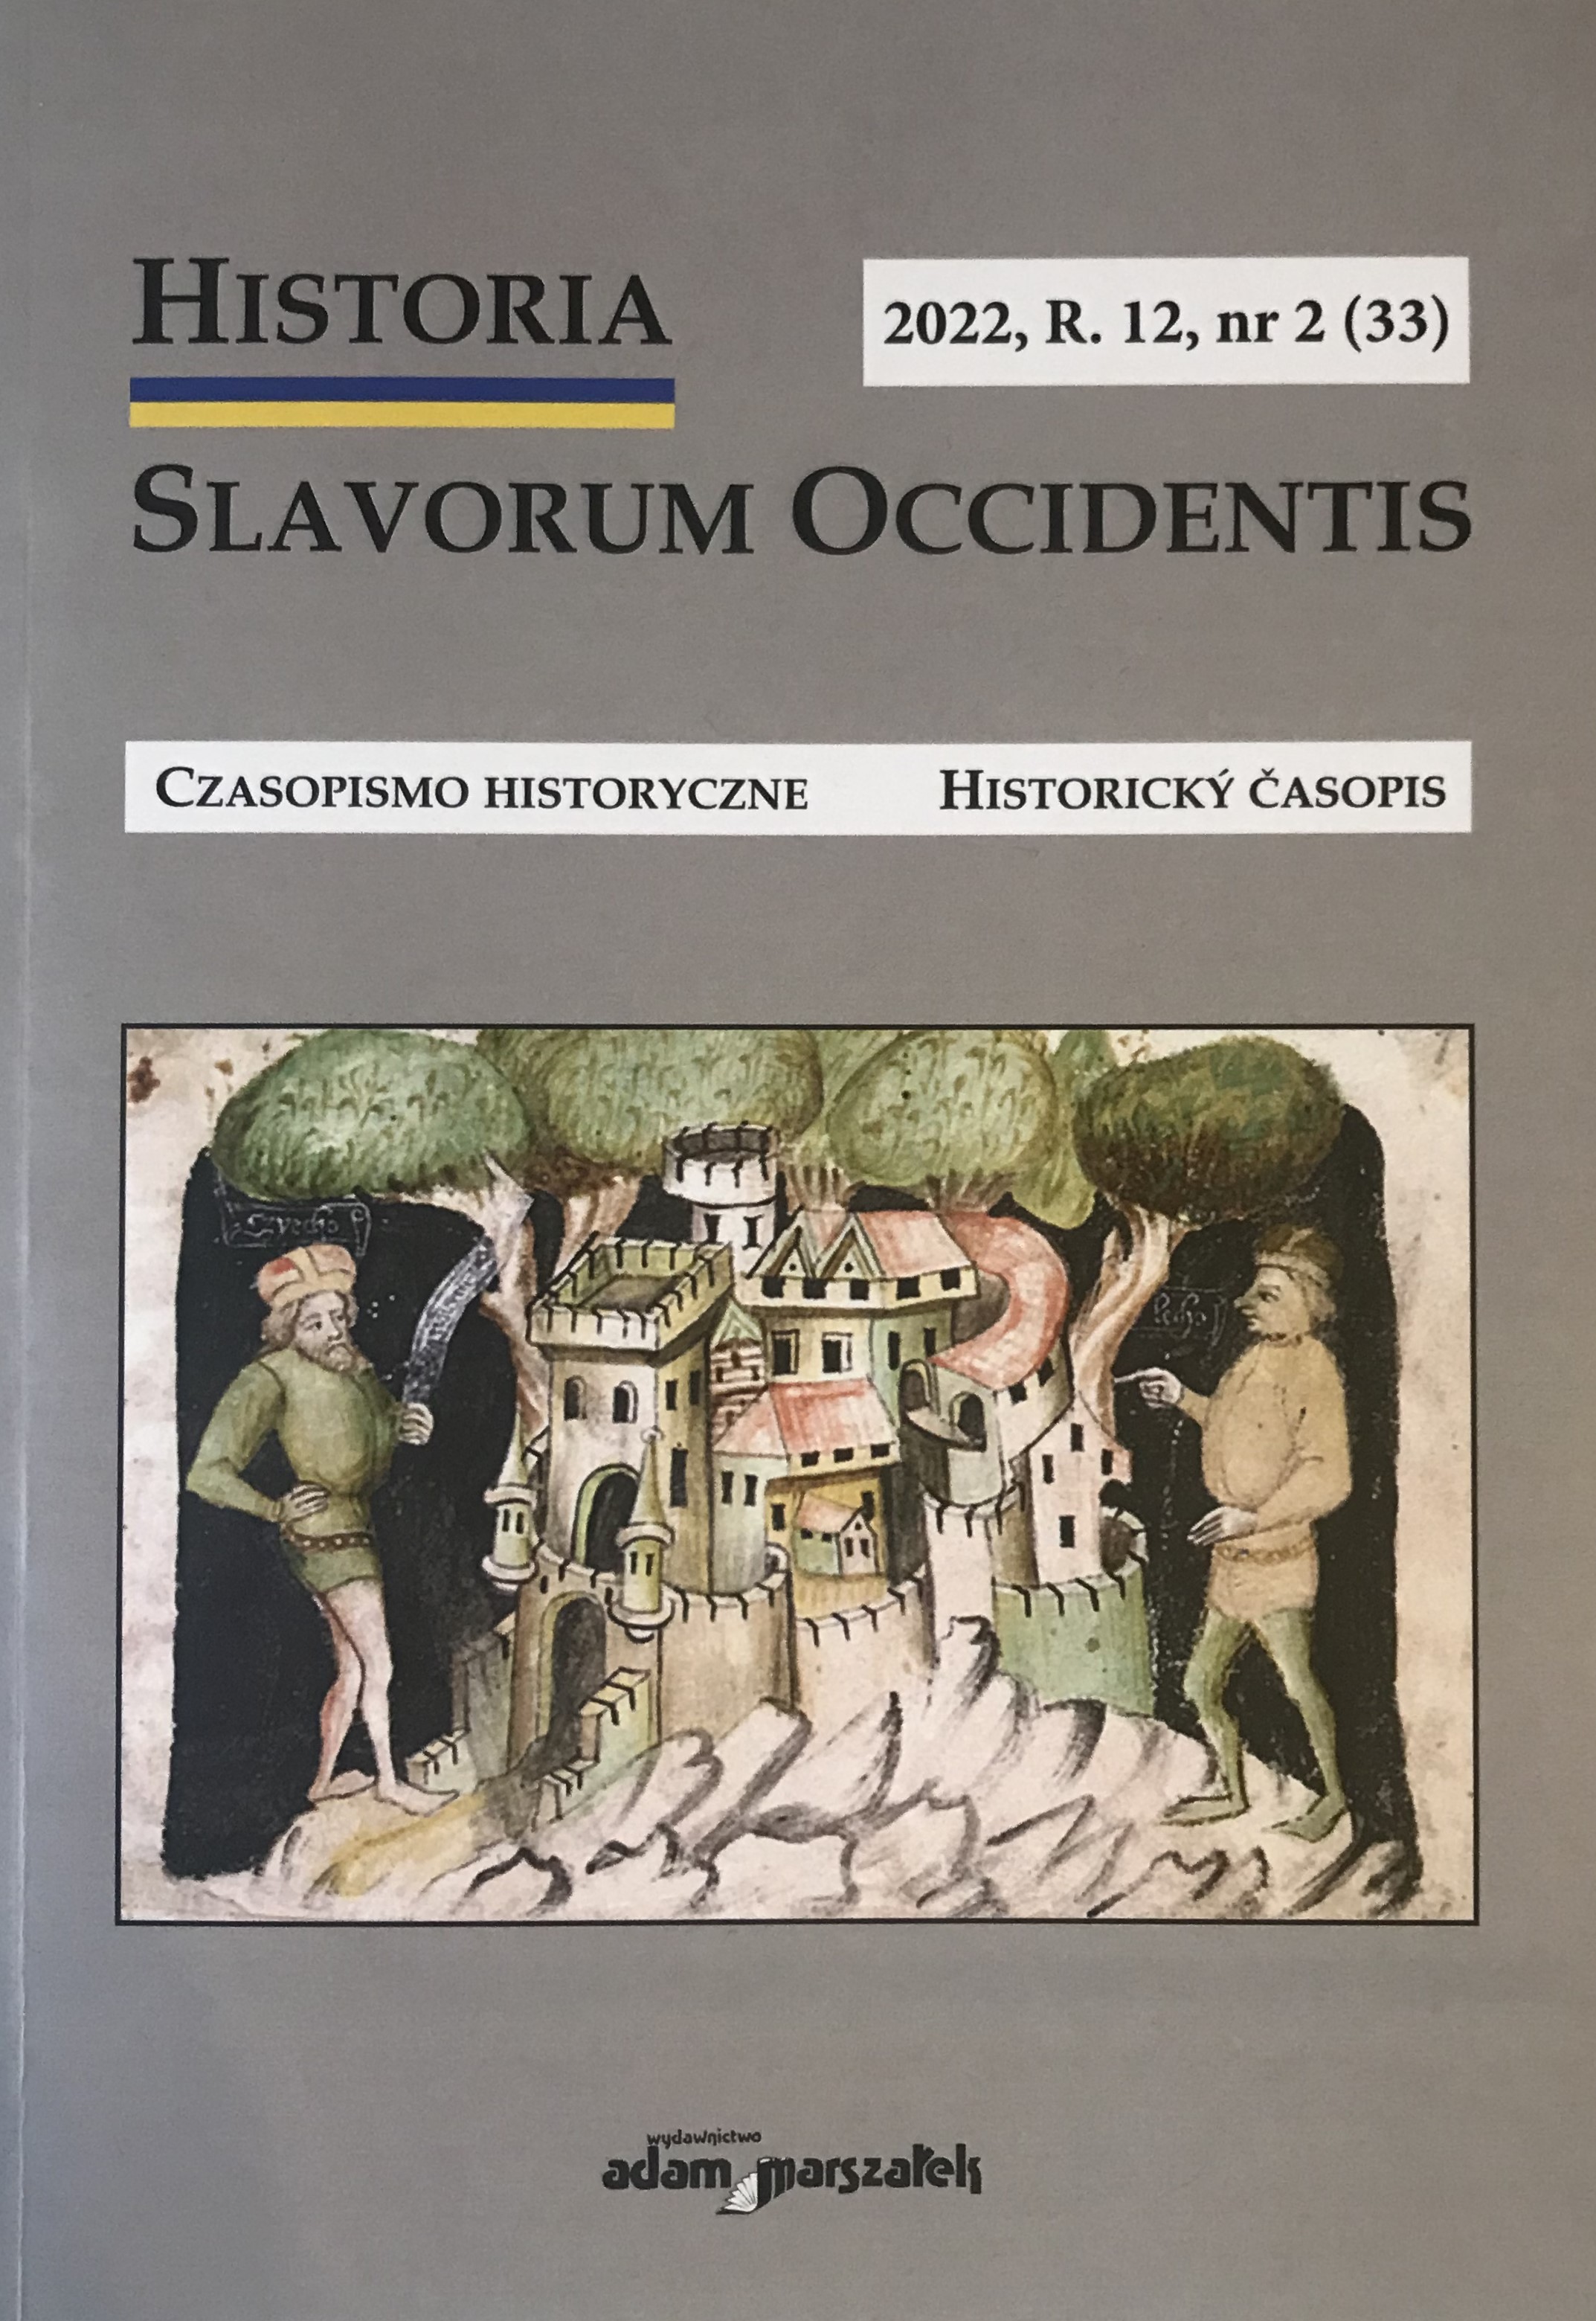 Medieval Polish and Silesian collections stored in the Charles University Archive in Prague. Cover Image